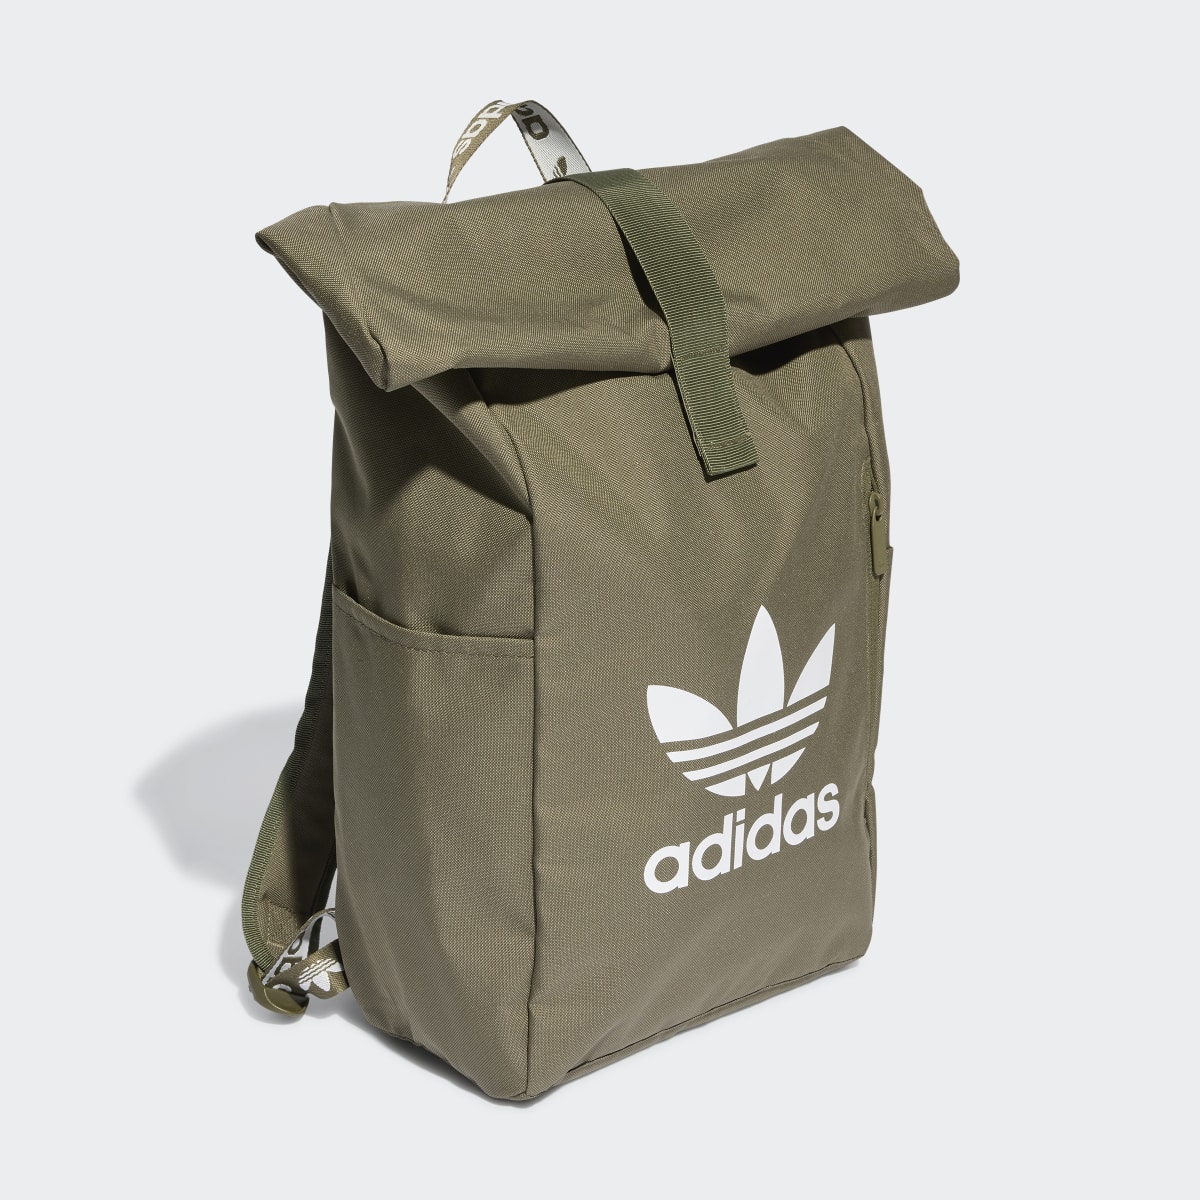 Adidas Adicolor Classic Roll-Top Backpack. 4